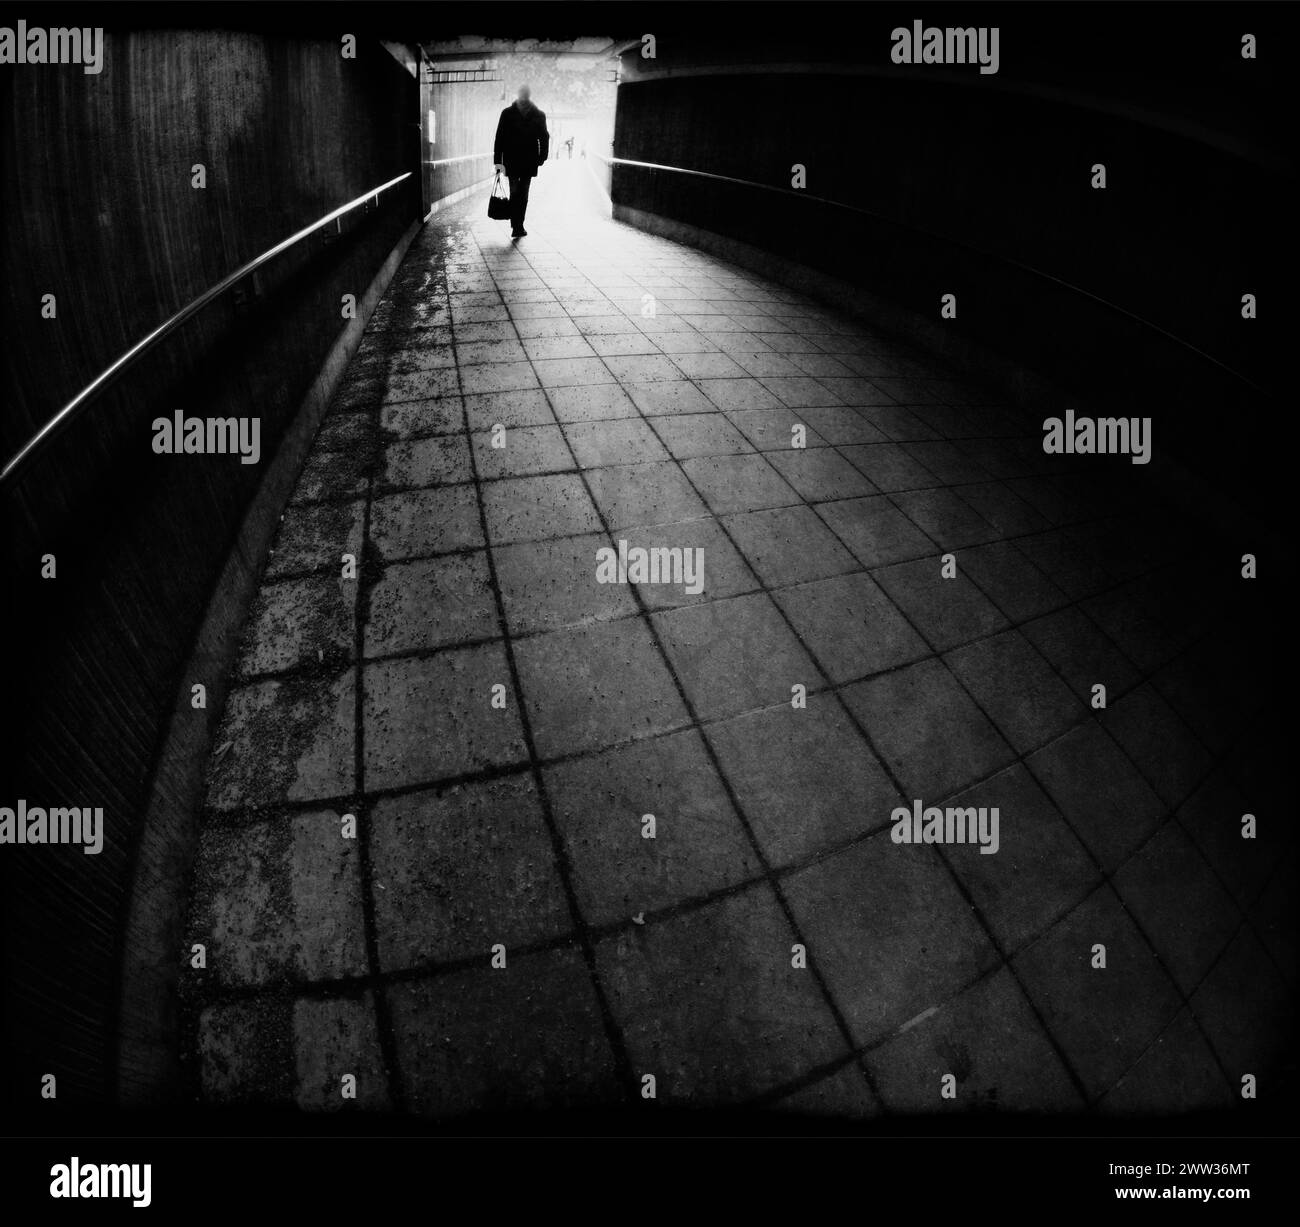 Silhouette of man entering a dark tunnel in black and white Stock Photo